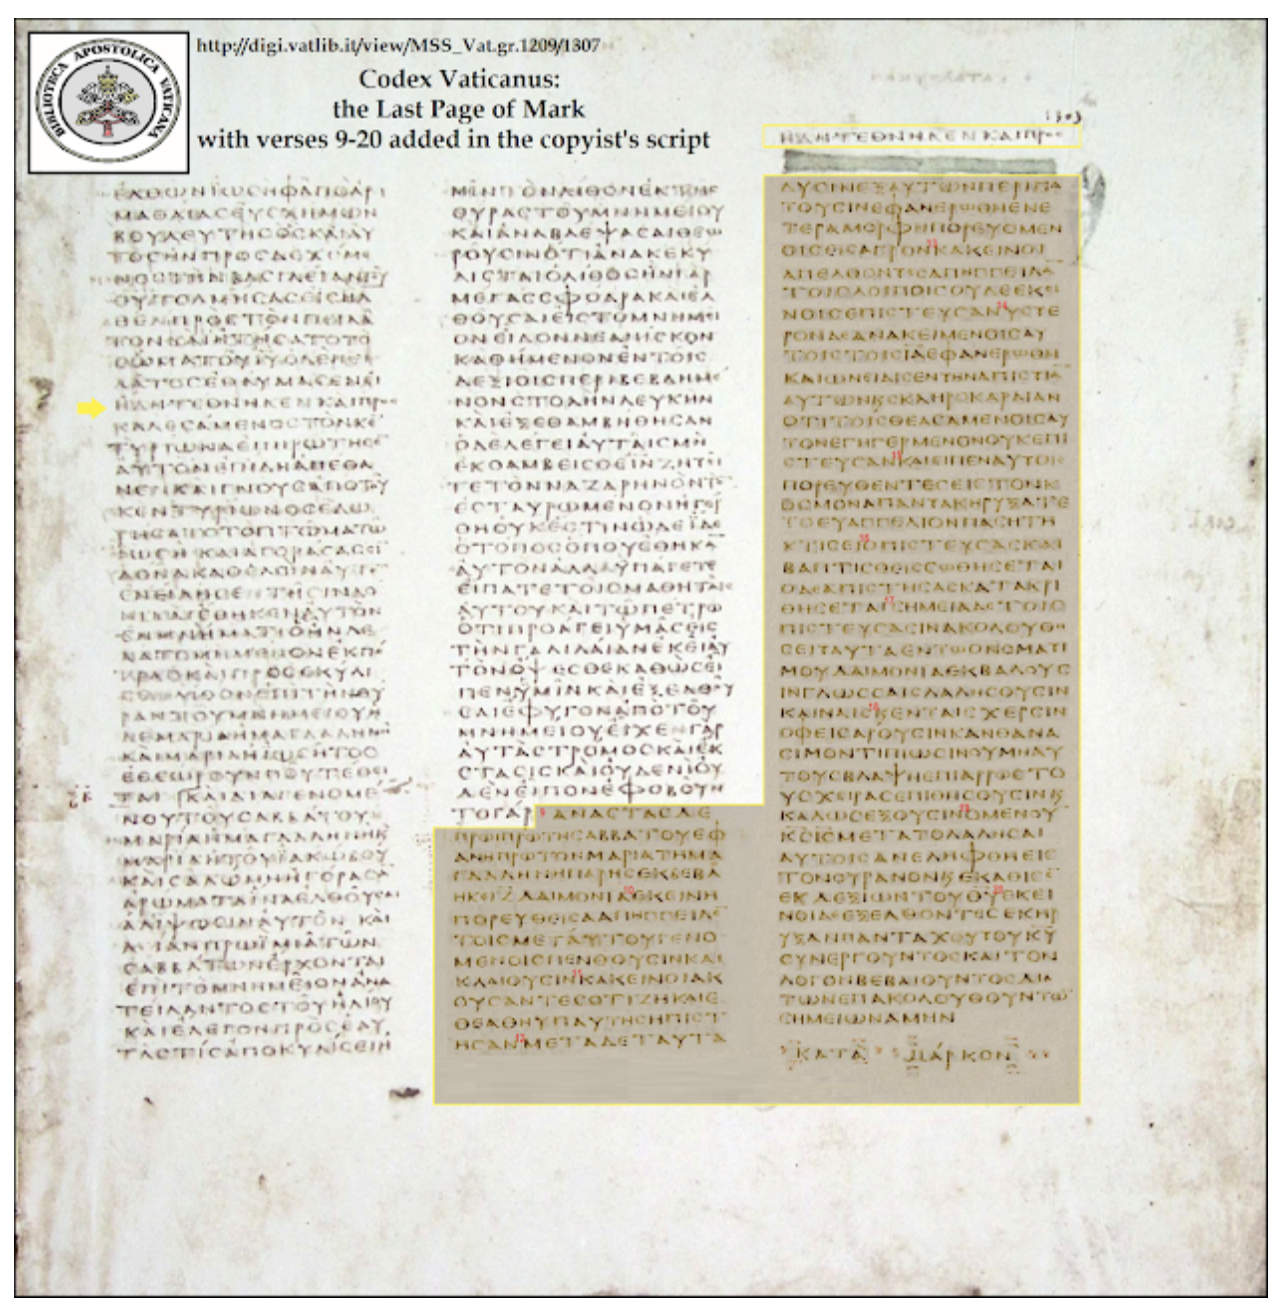 James Snapp's cut-and-paste technique for inserting the longer ending of Mark into the space on Vaticanus